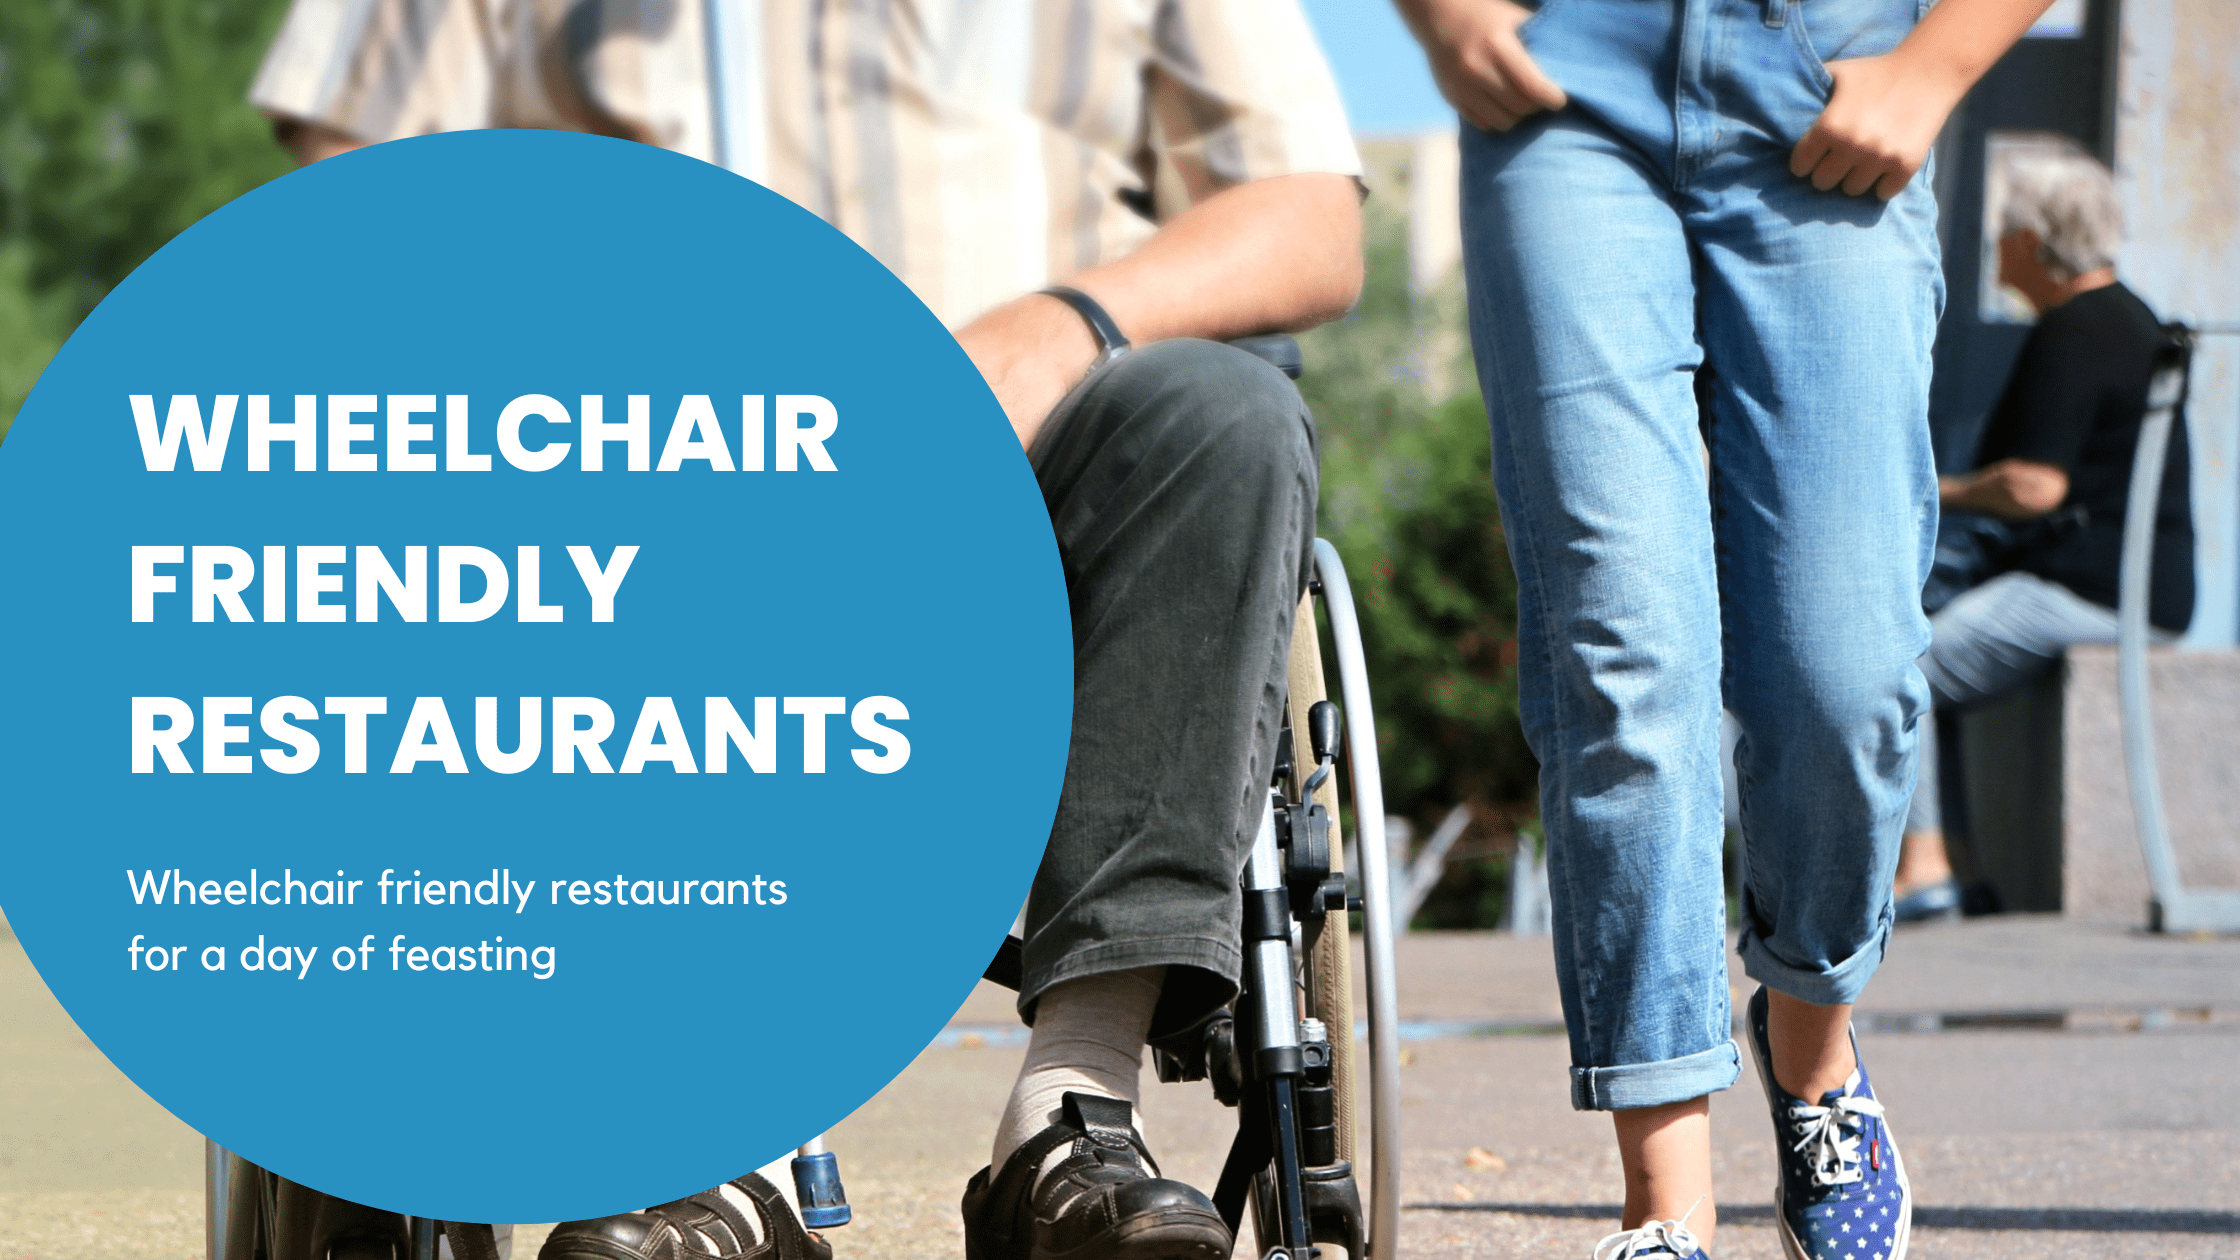 7 wheelchair friendly restaurants and cafes in Singapore